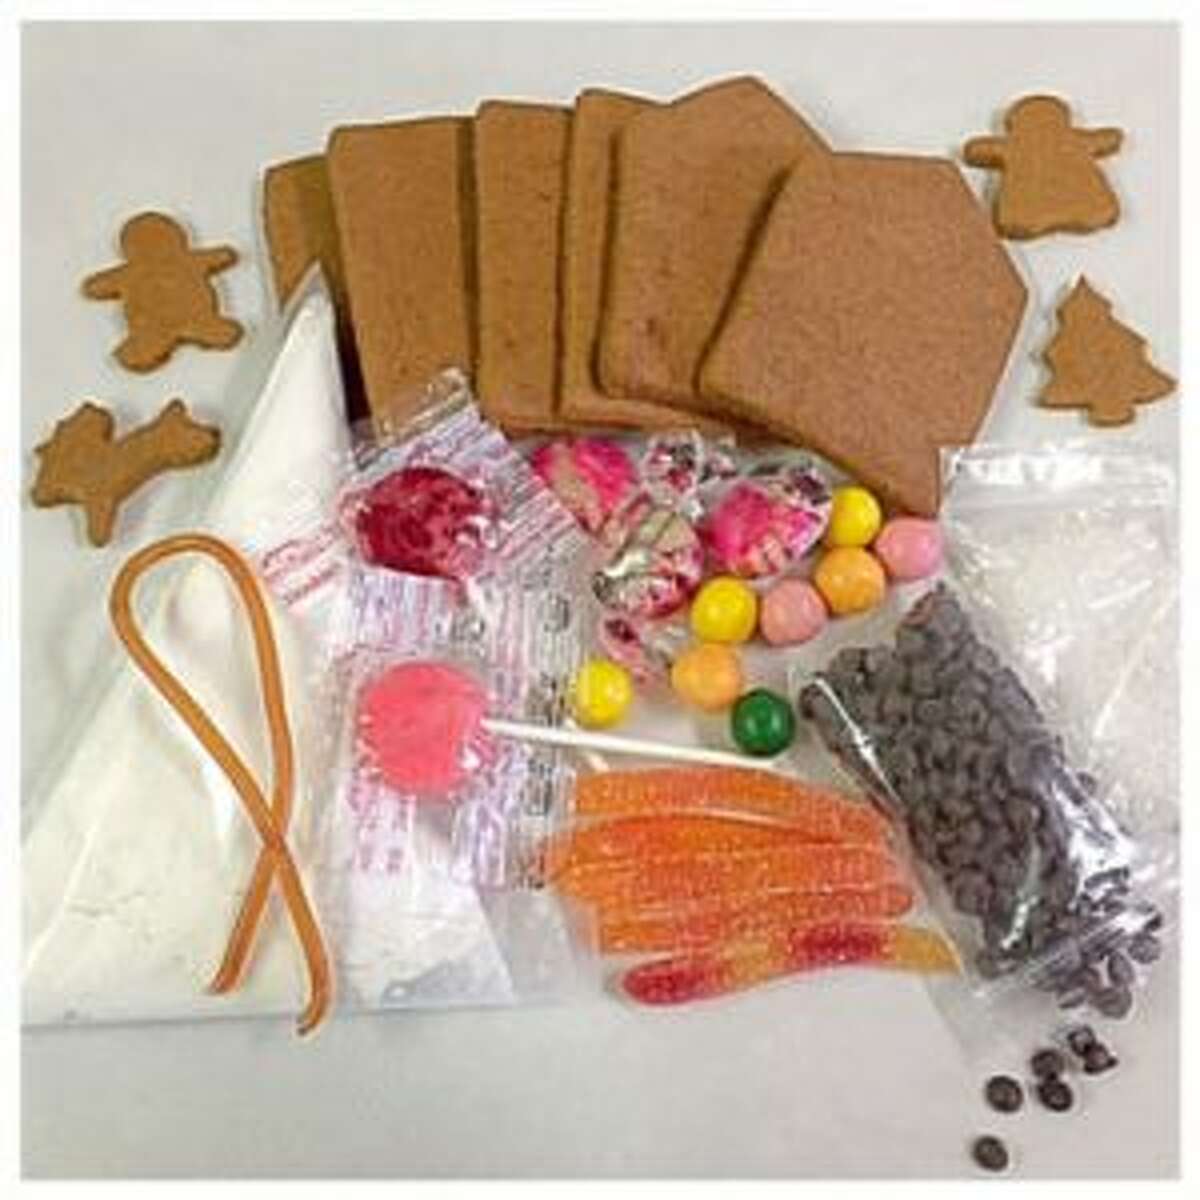 Izzi B’s Allergen Free Bakery in Norwalk offers gingerbread house kits and all the fixings.